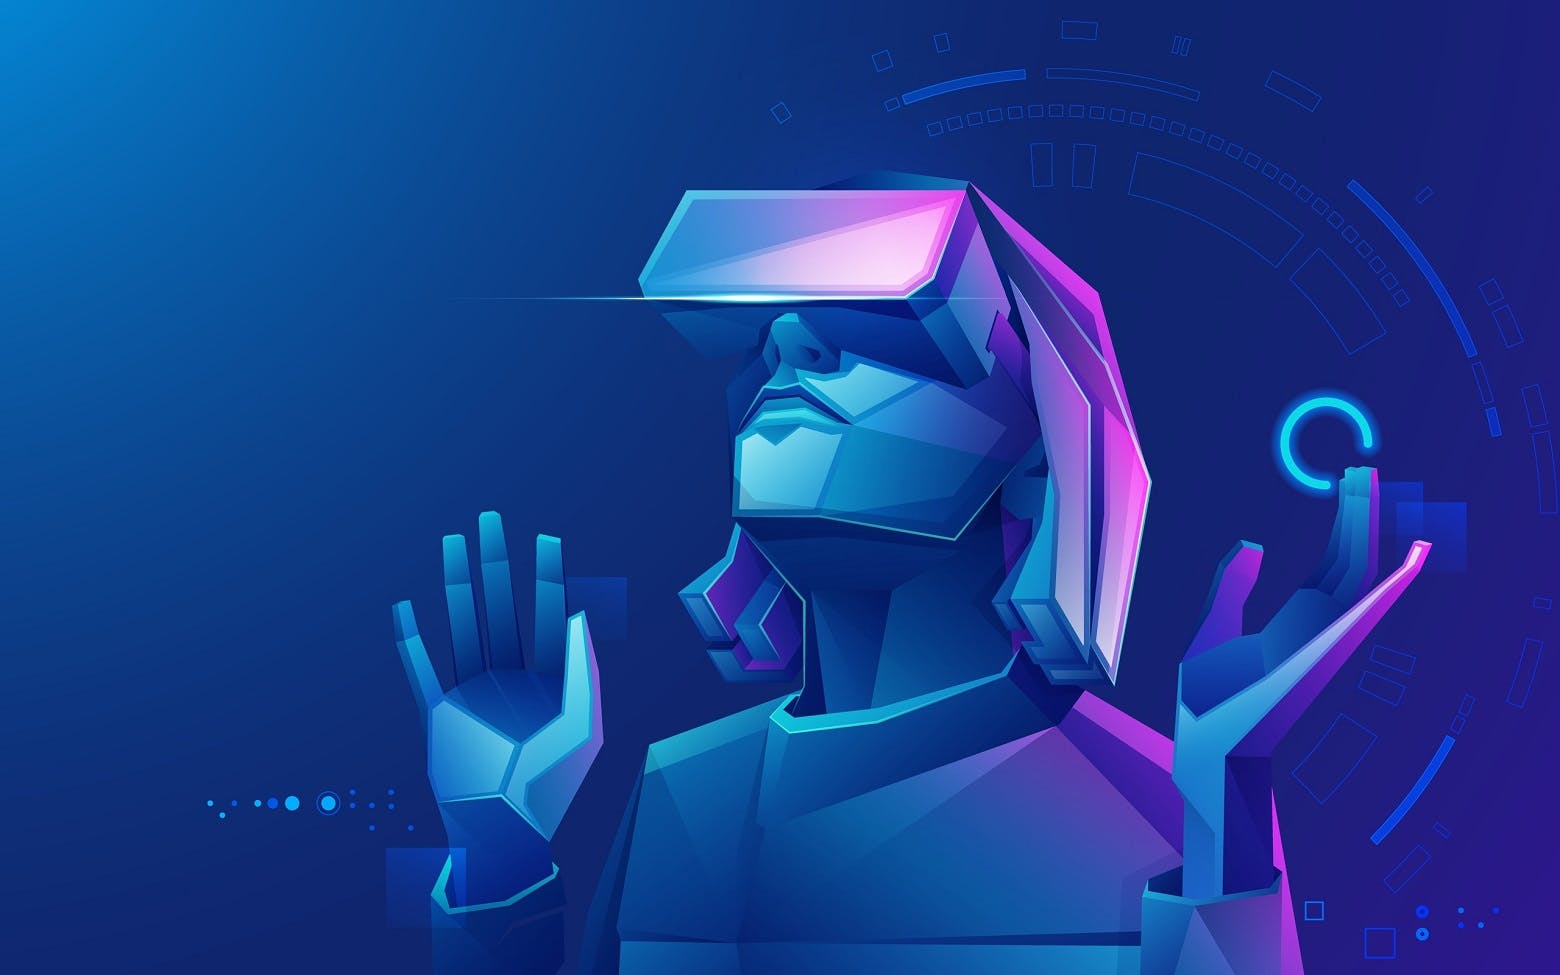 7 Things You Need To Know About Meta and Metaverse